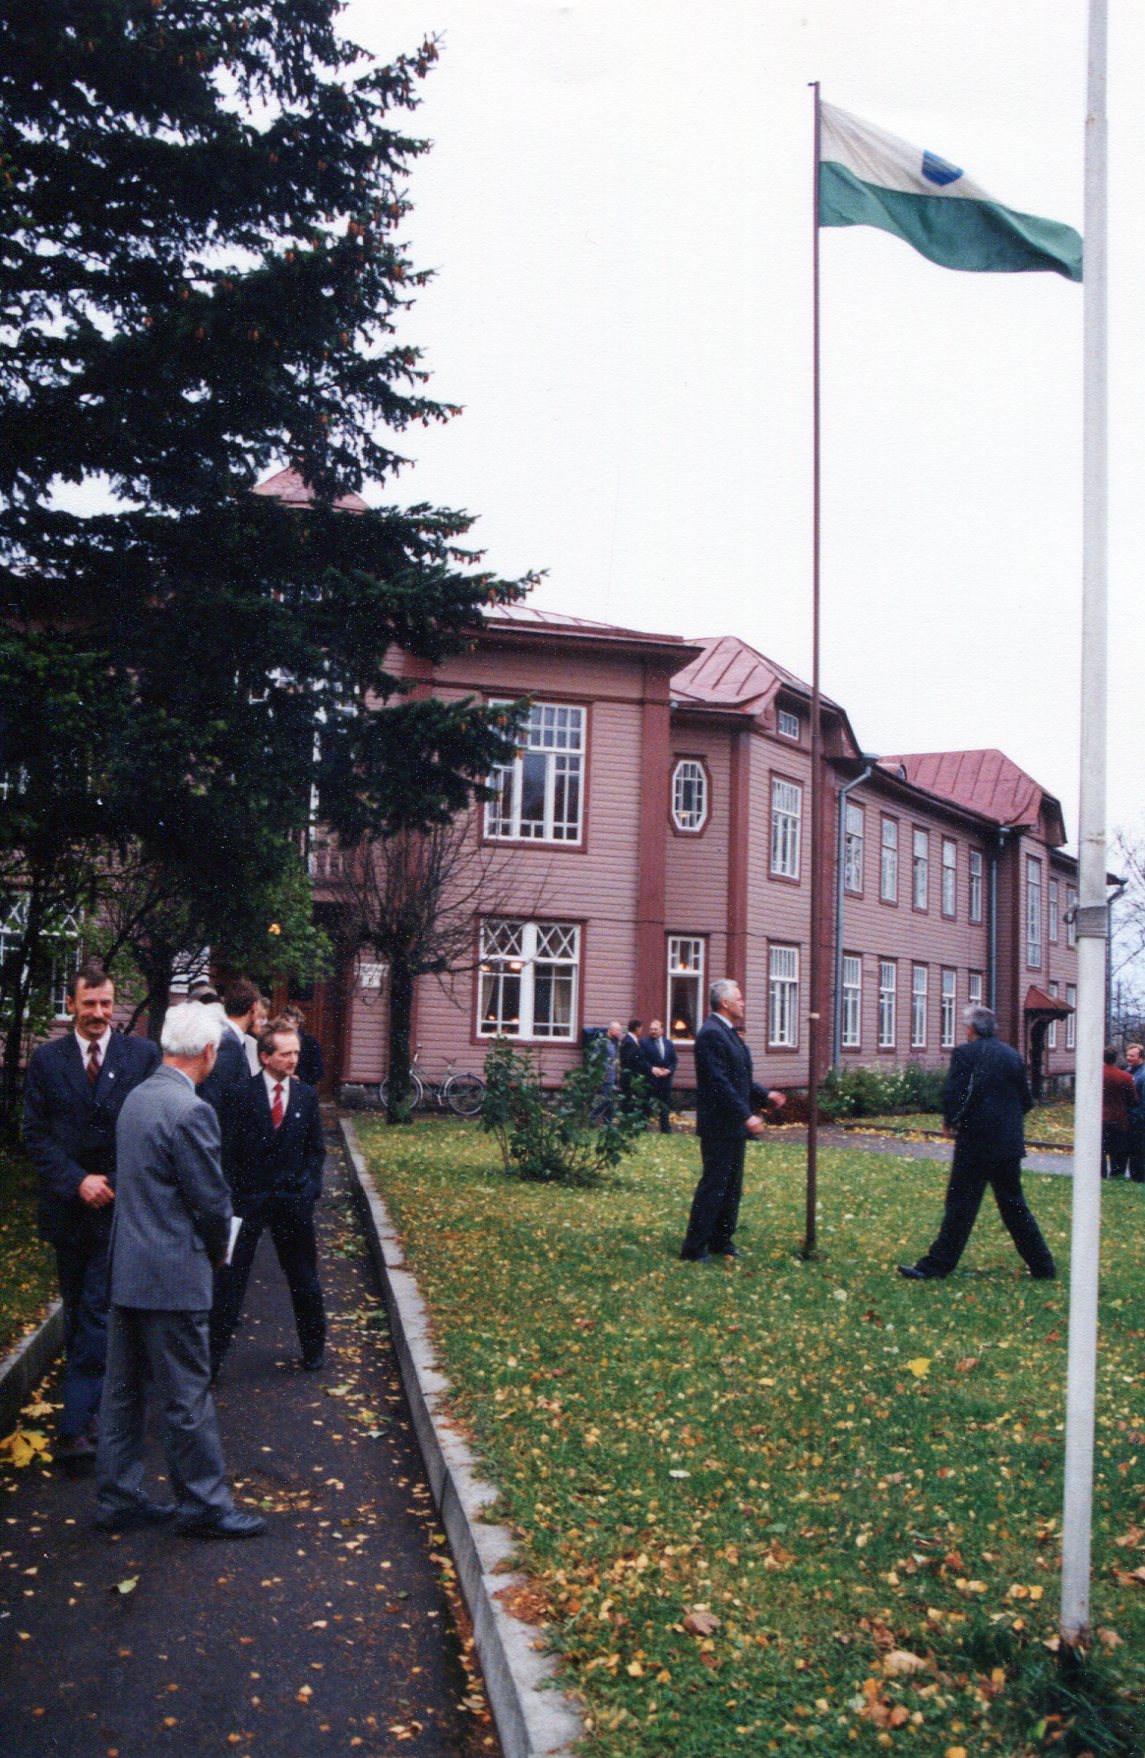 Casting the flag of the Western Viru Country Government 1992